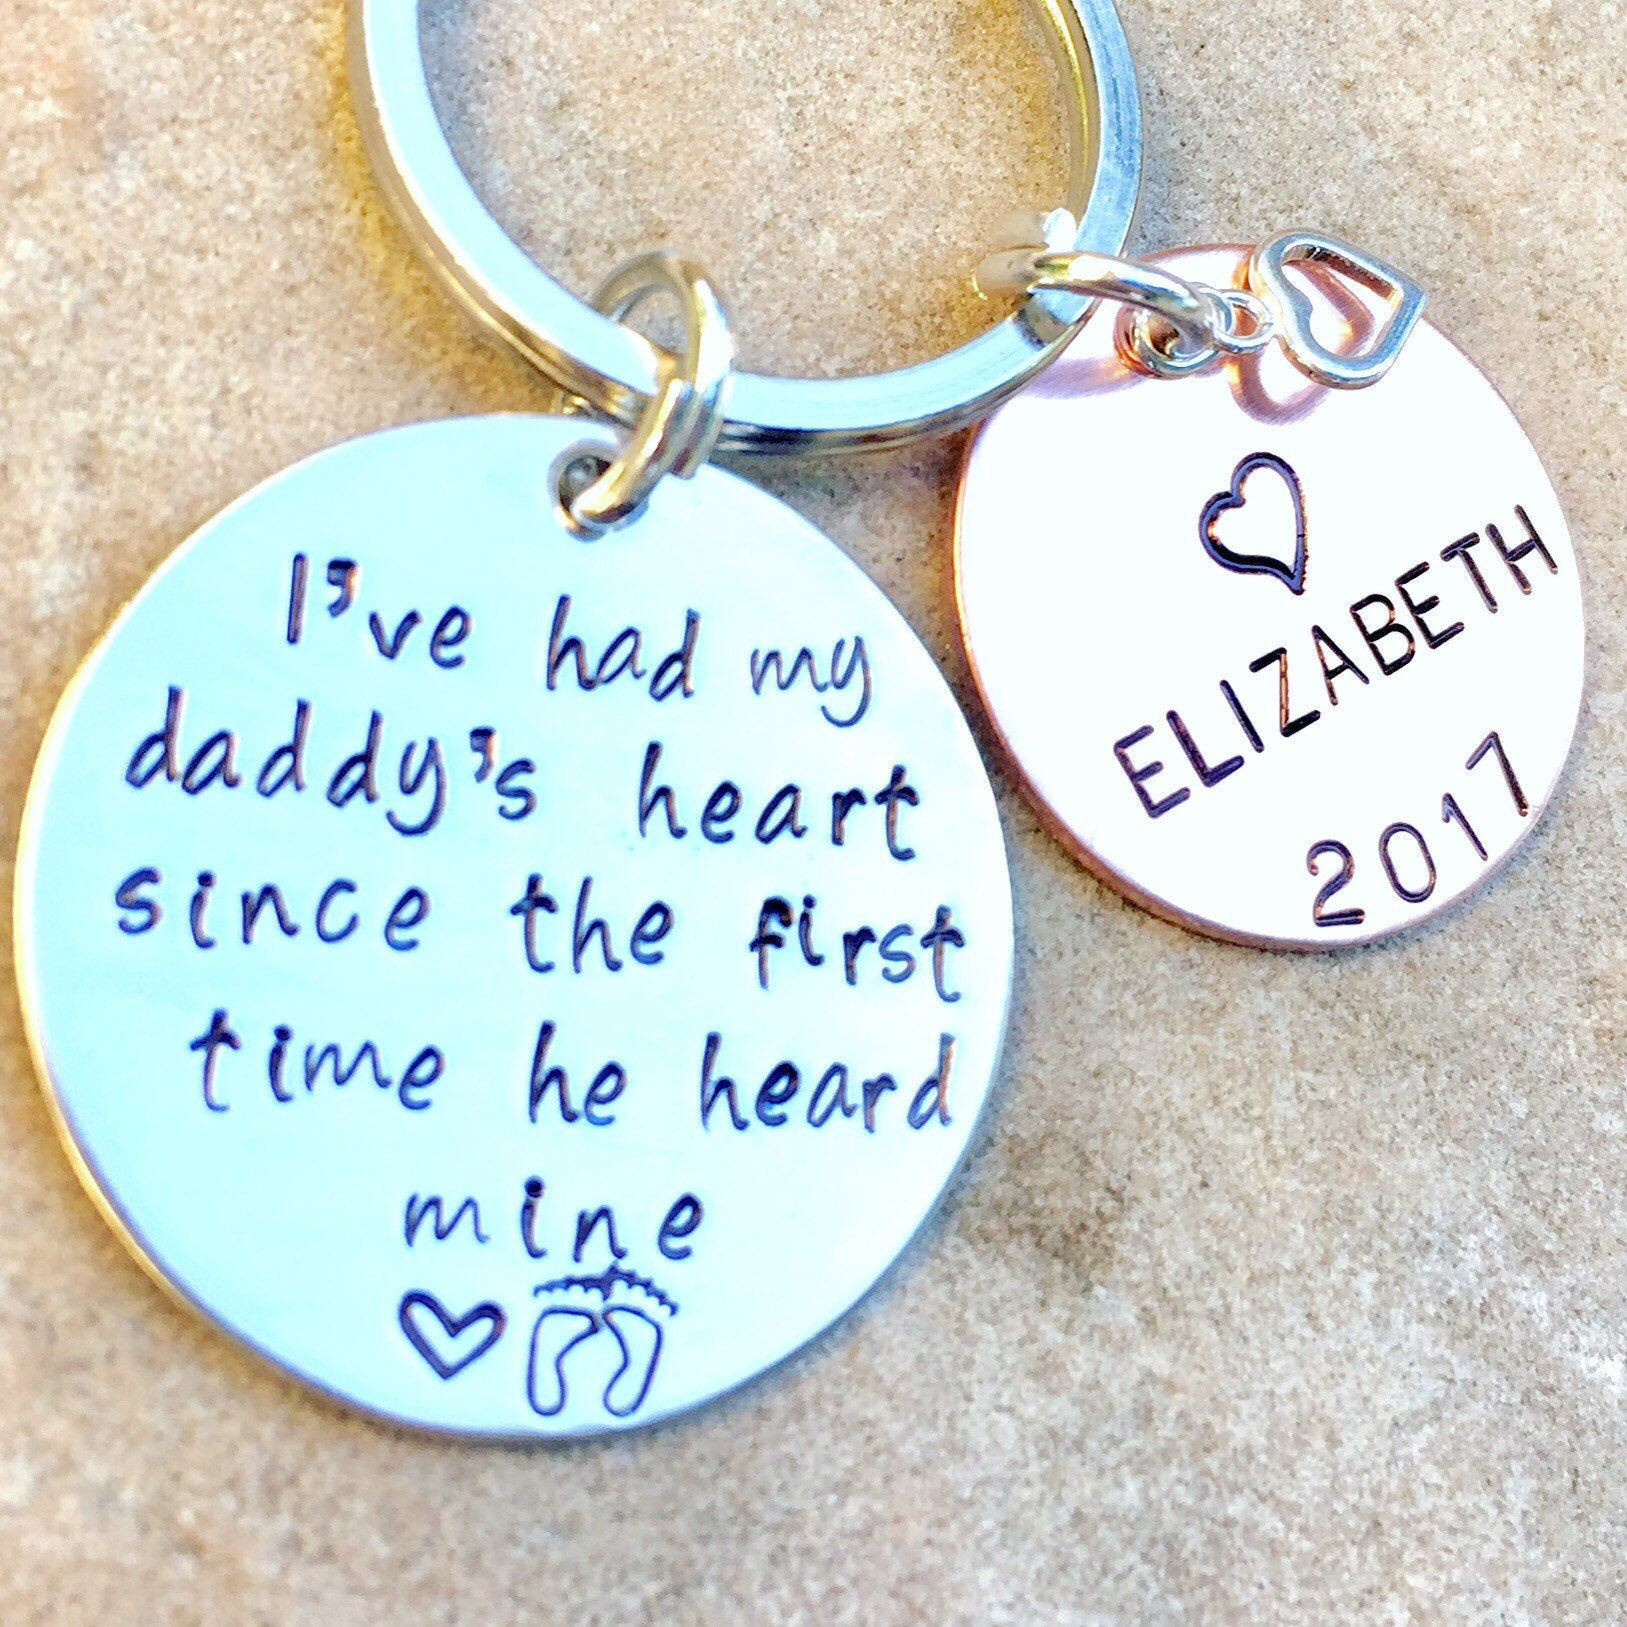 Father Daughter Valentine Gift Ideas
 Father Daughter Gift Ive Had My Daddys Heart Since The